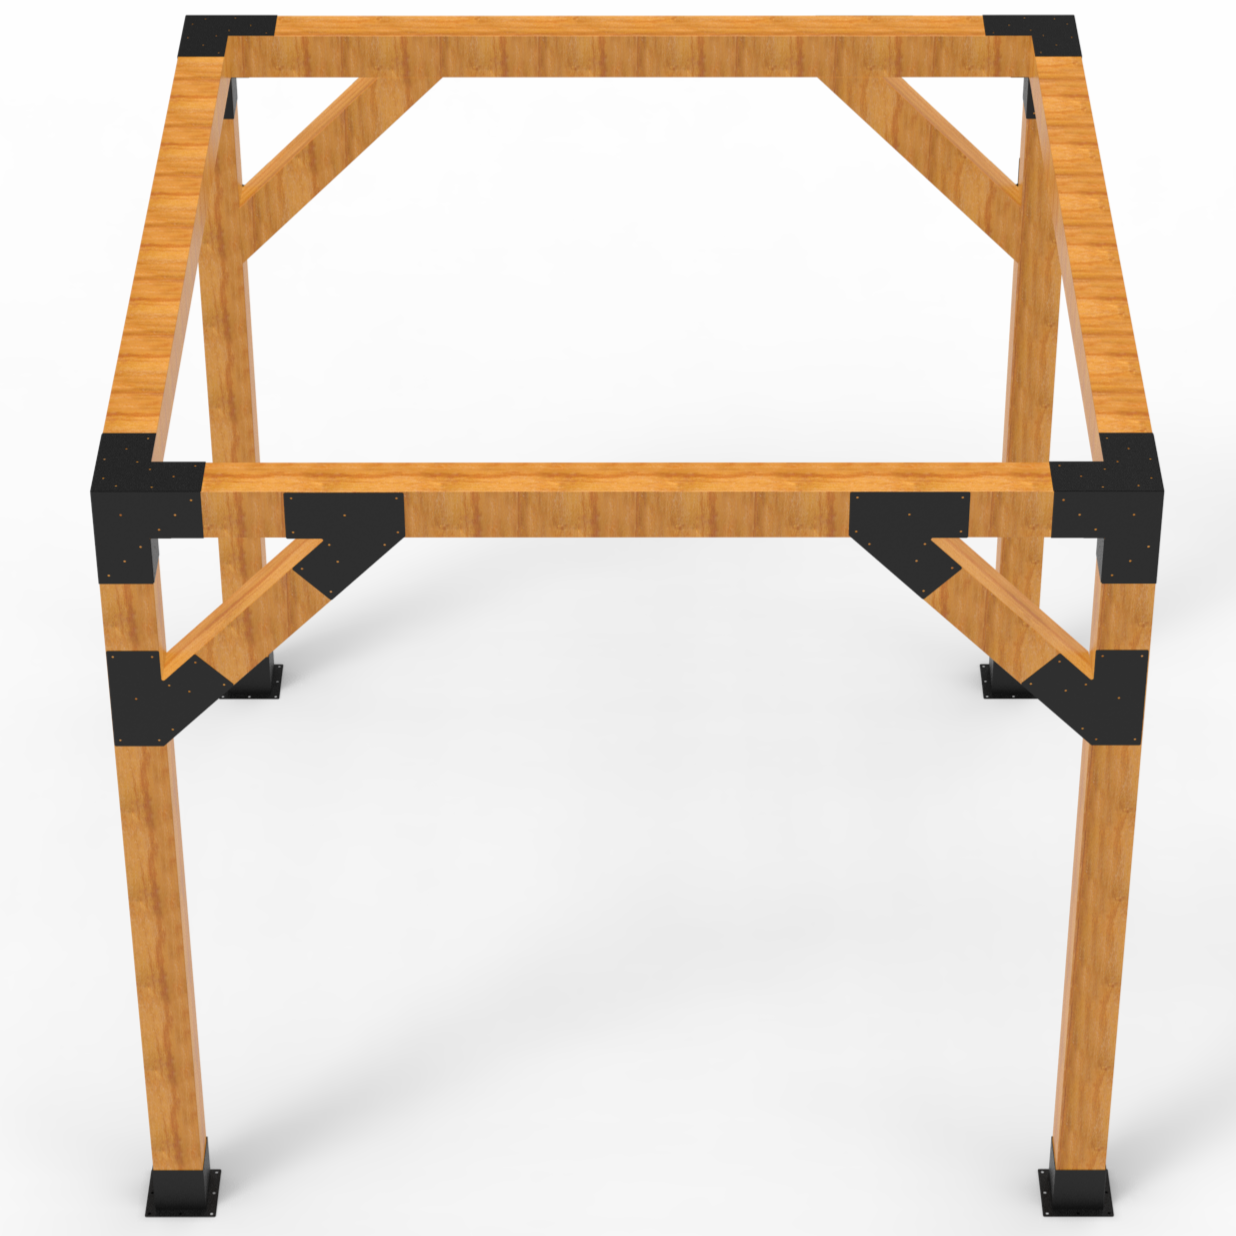 Pergola Kit with stiffeners for 6"X6" Wood Posts